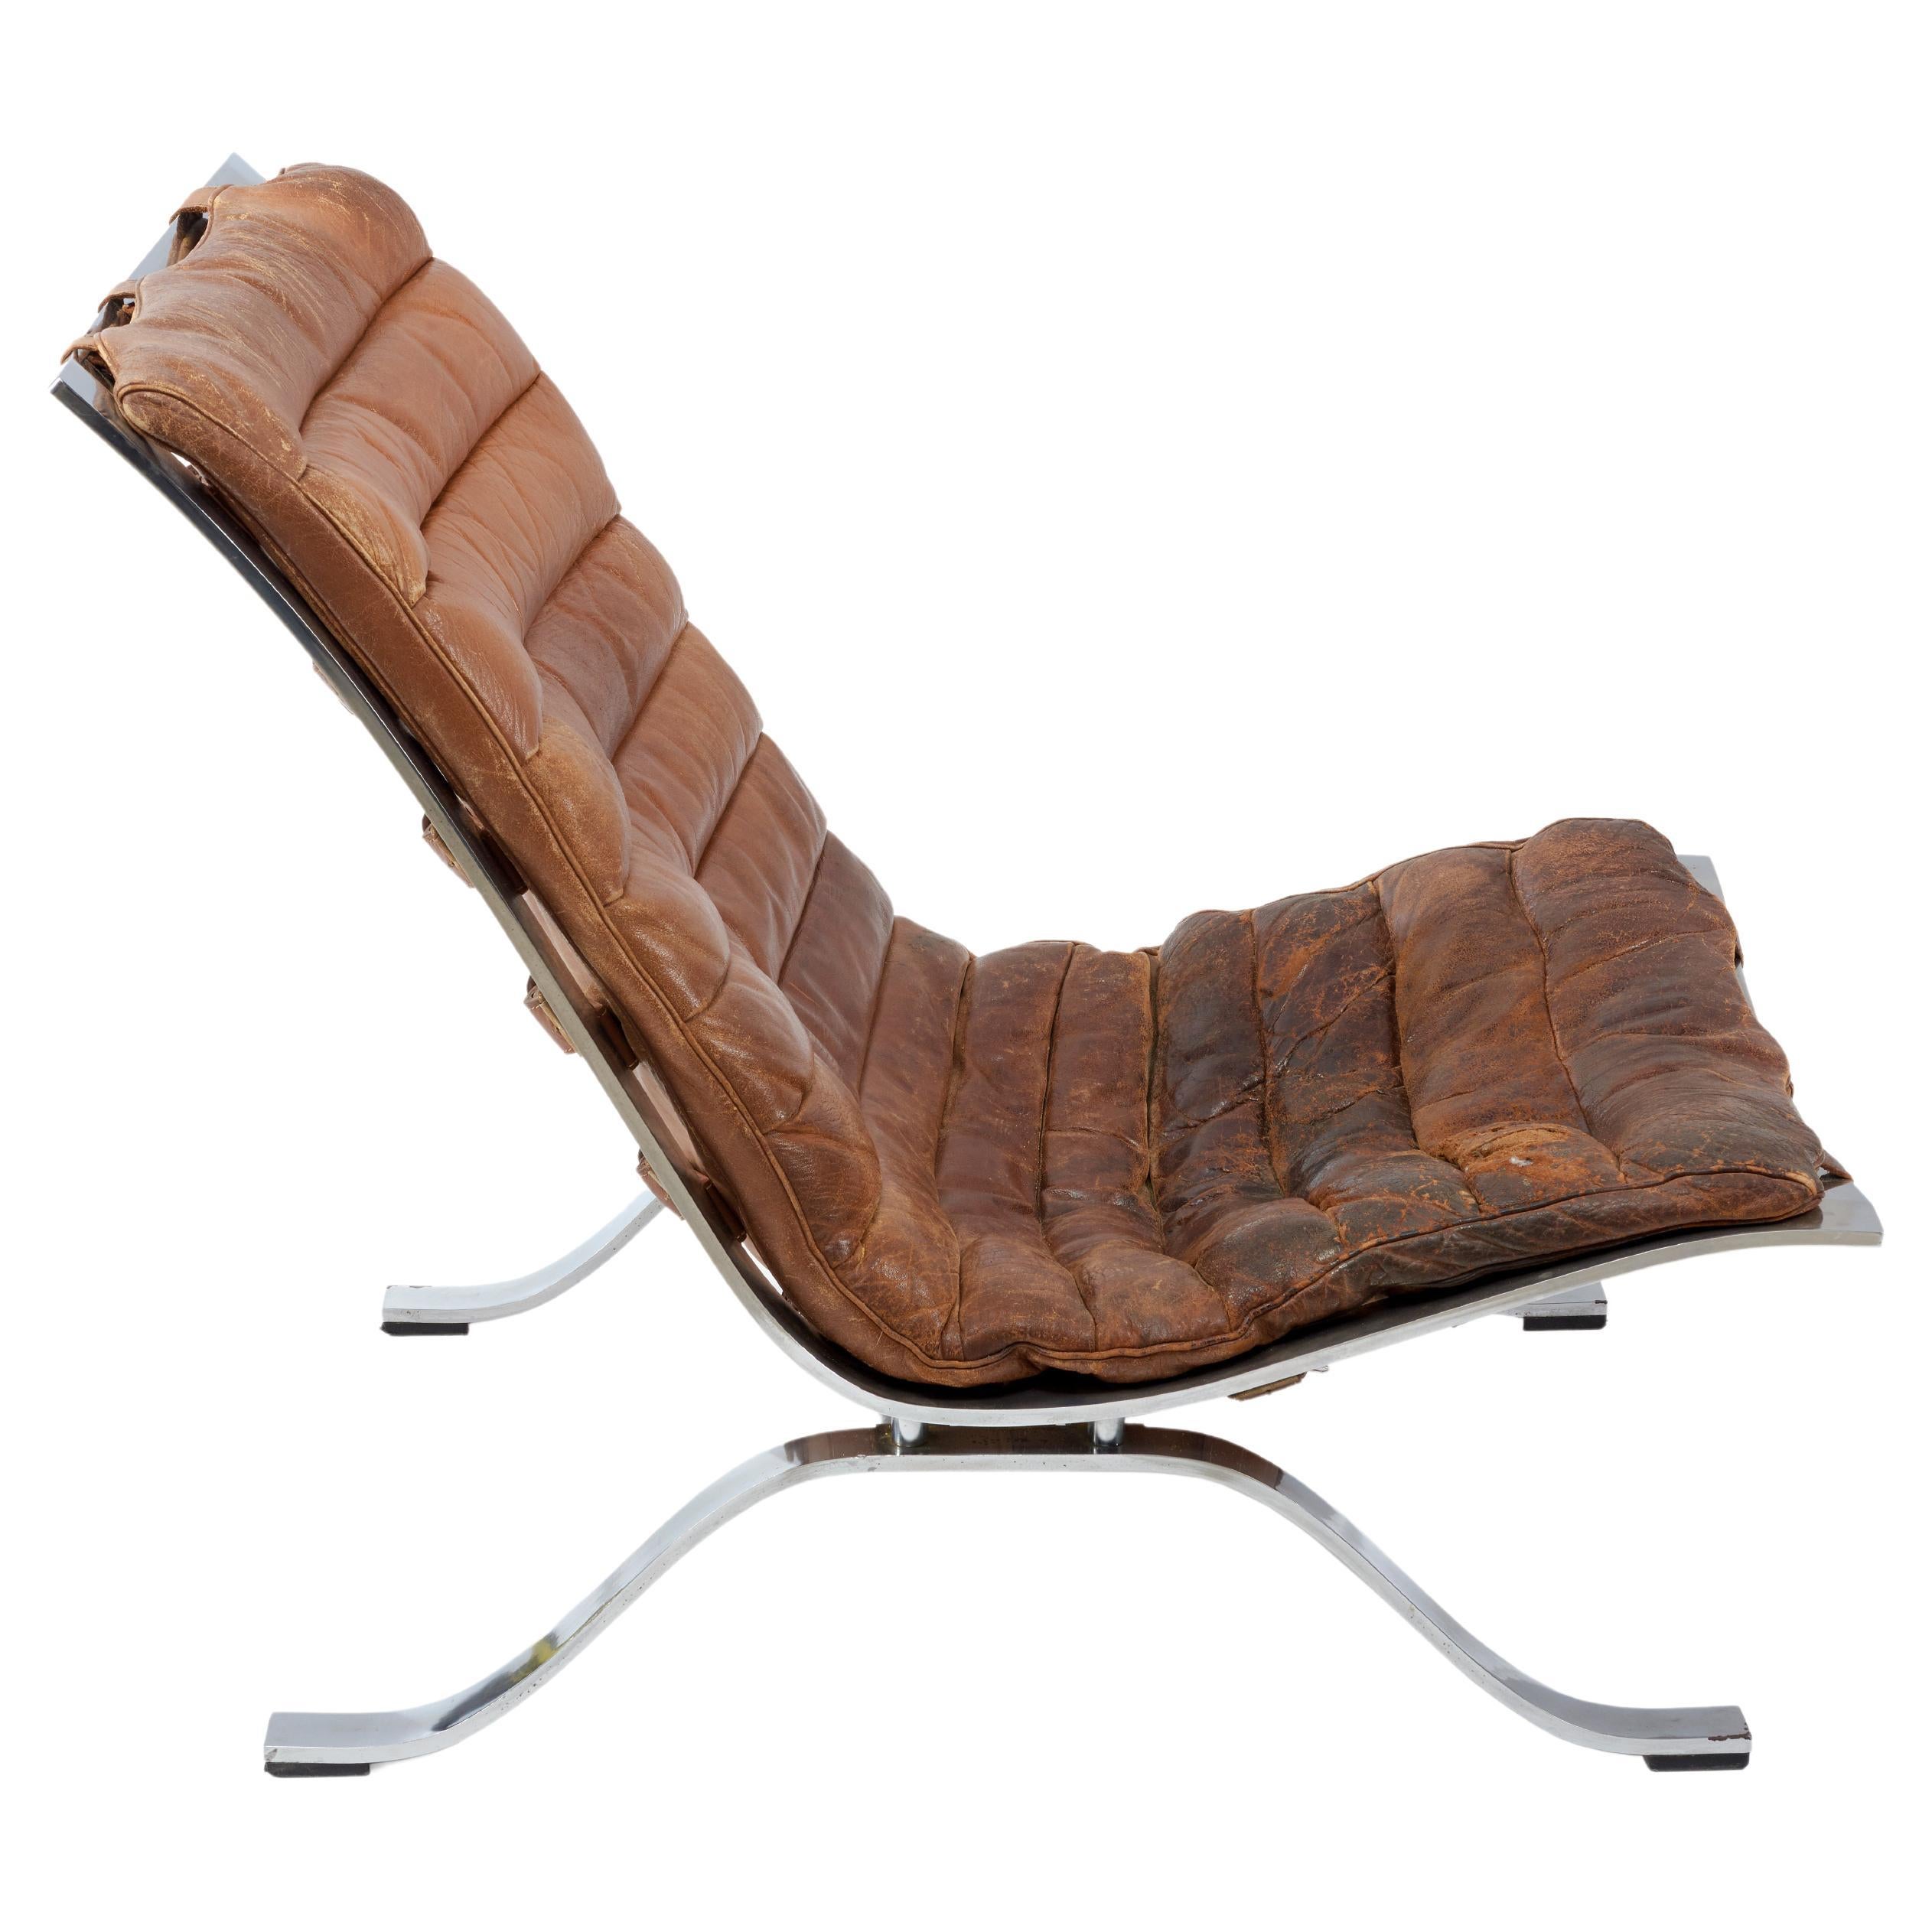 The famous Steel framed leather 'Ari' Lounge chair by Legendary Swedish designer Arne Norell from 1966.
This vintage rugged and beautifully aged chair comes with it's original leather cushion, straps  and chrome frame. There is  patina to the